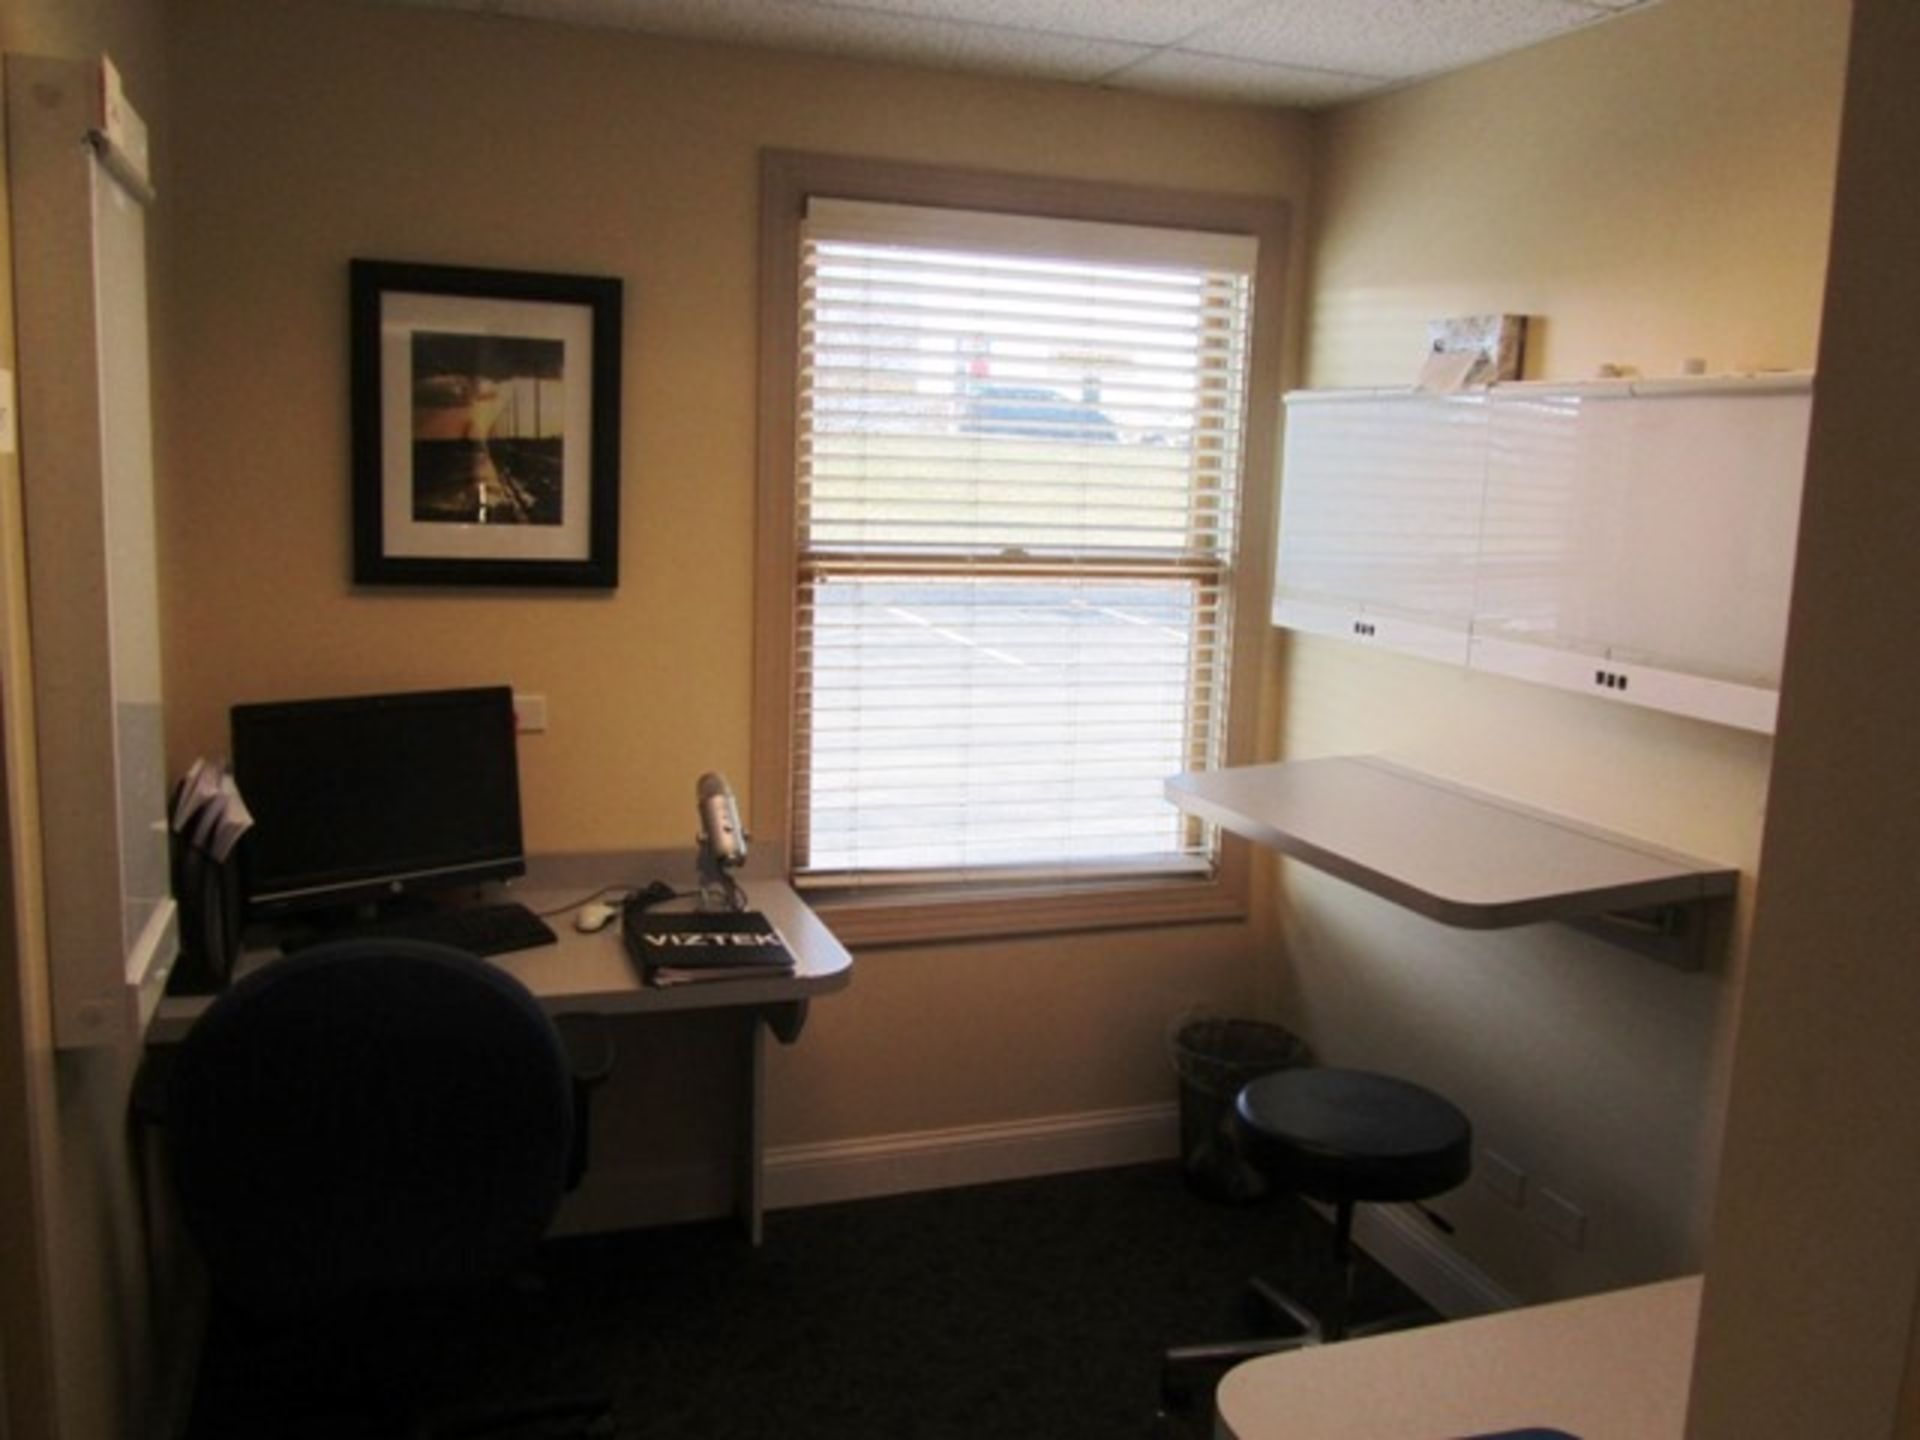 (3) Light Boxes (for x-rays), (2) HP All-In-One Computers, *located Orland Park, IL